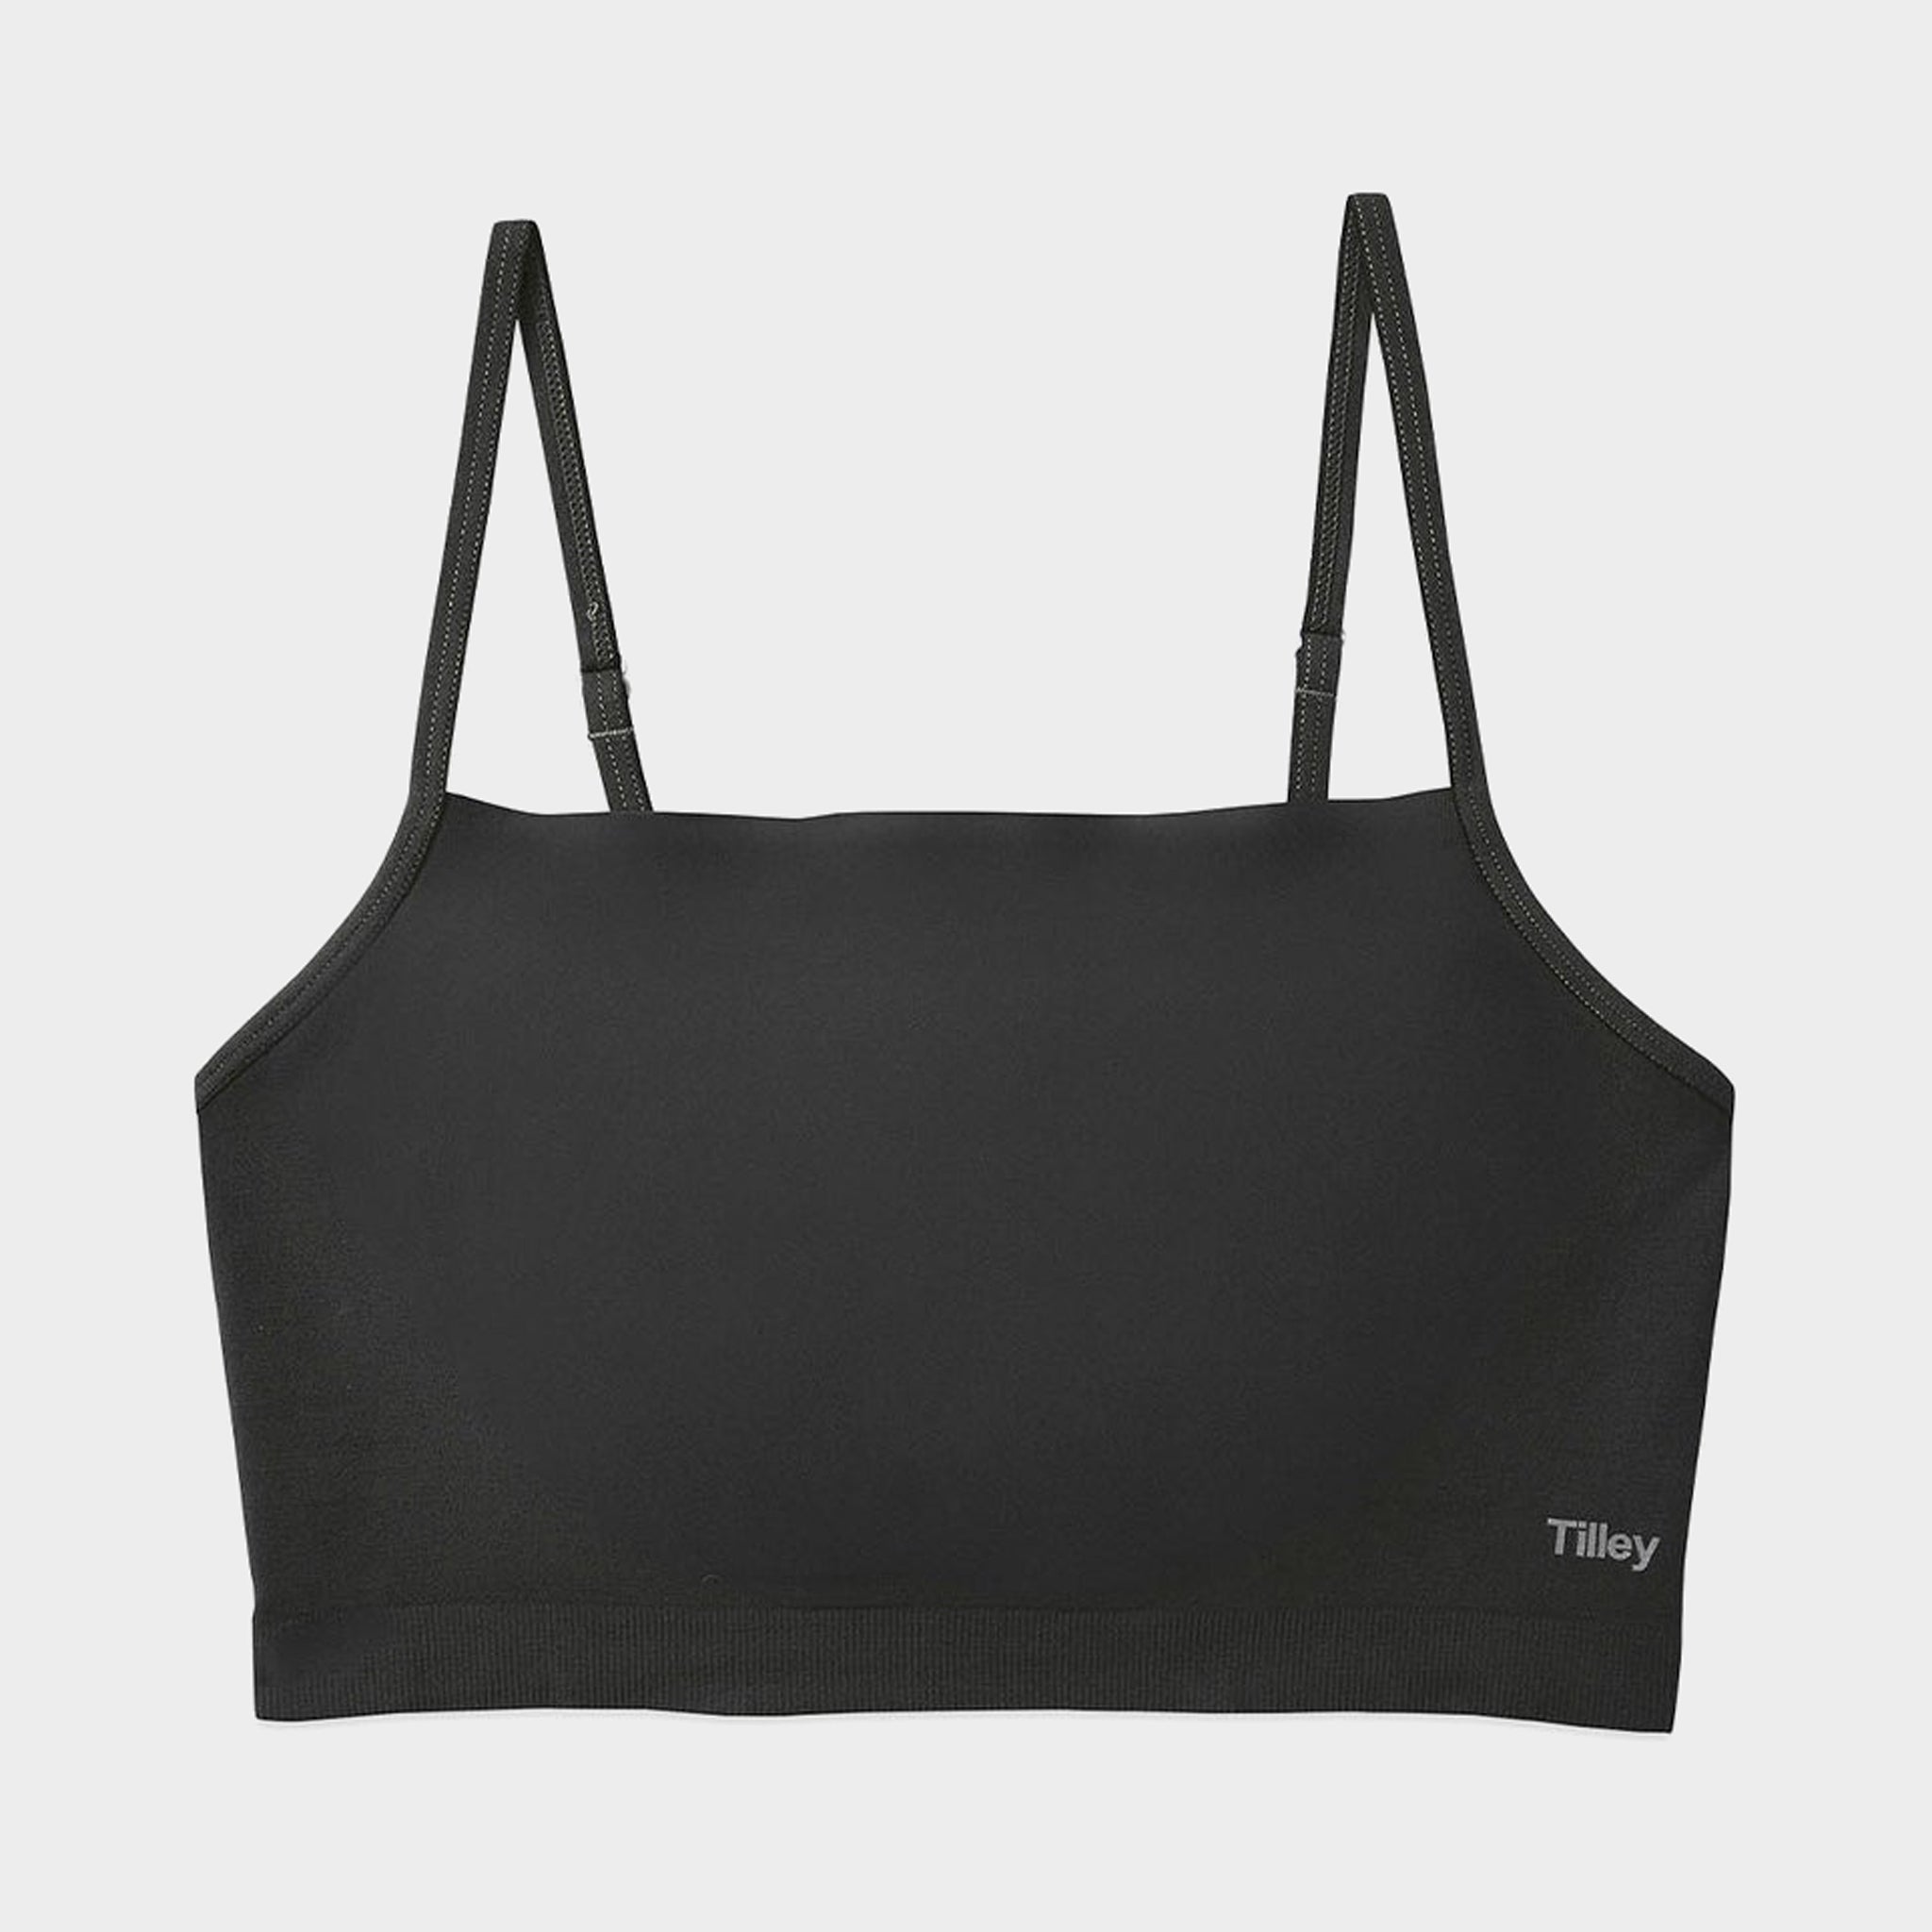 Tilley Shirts and sports bras - Canada